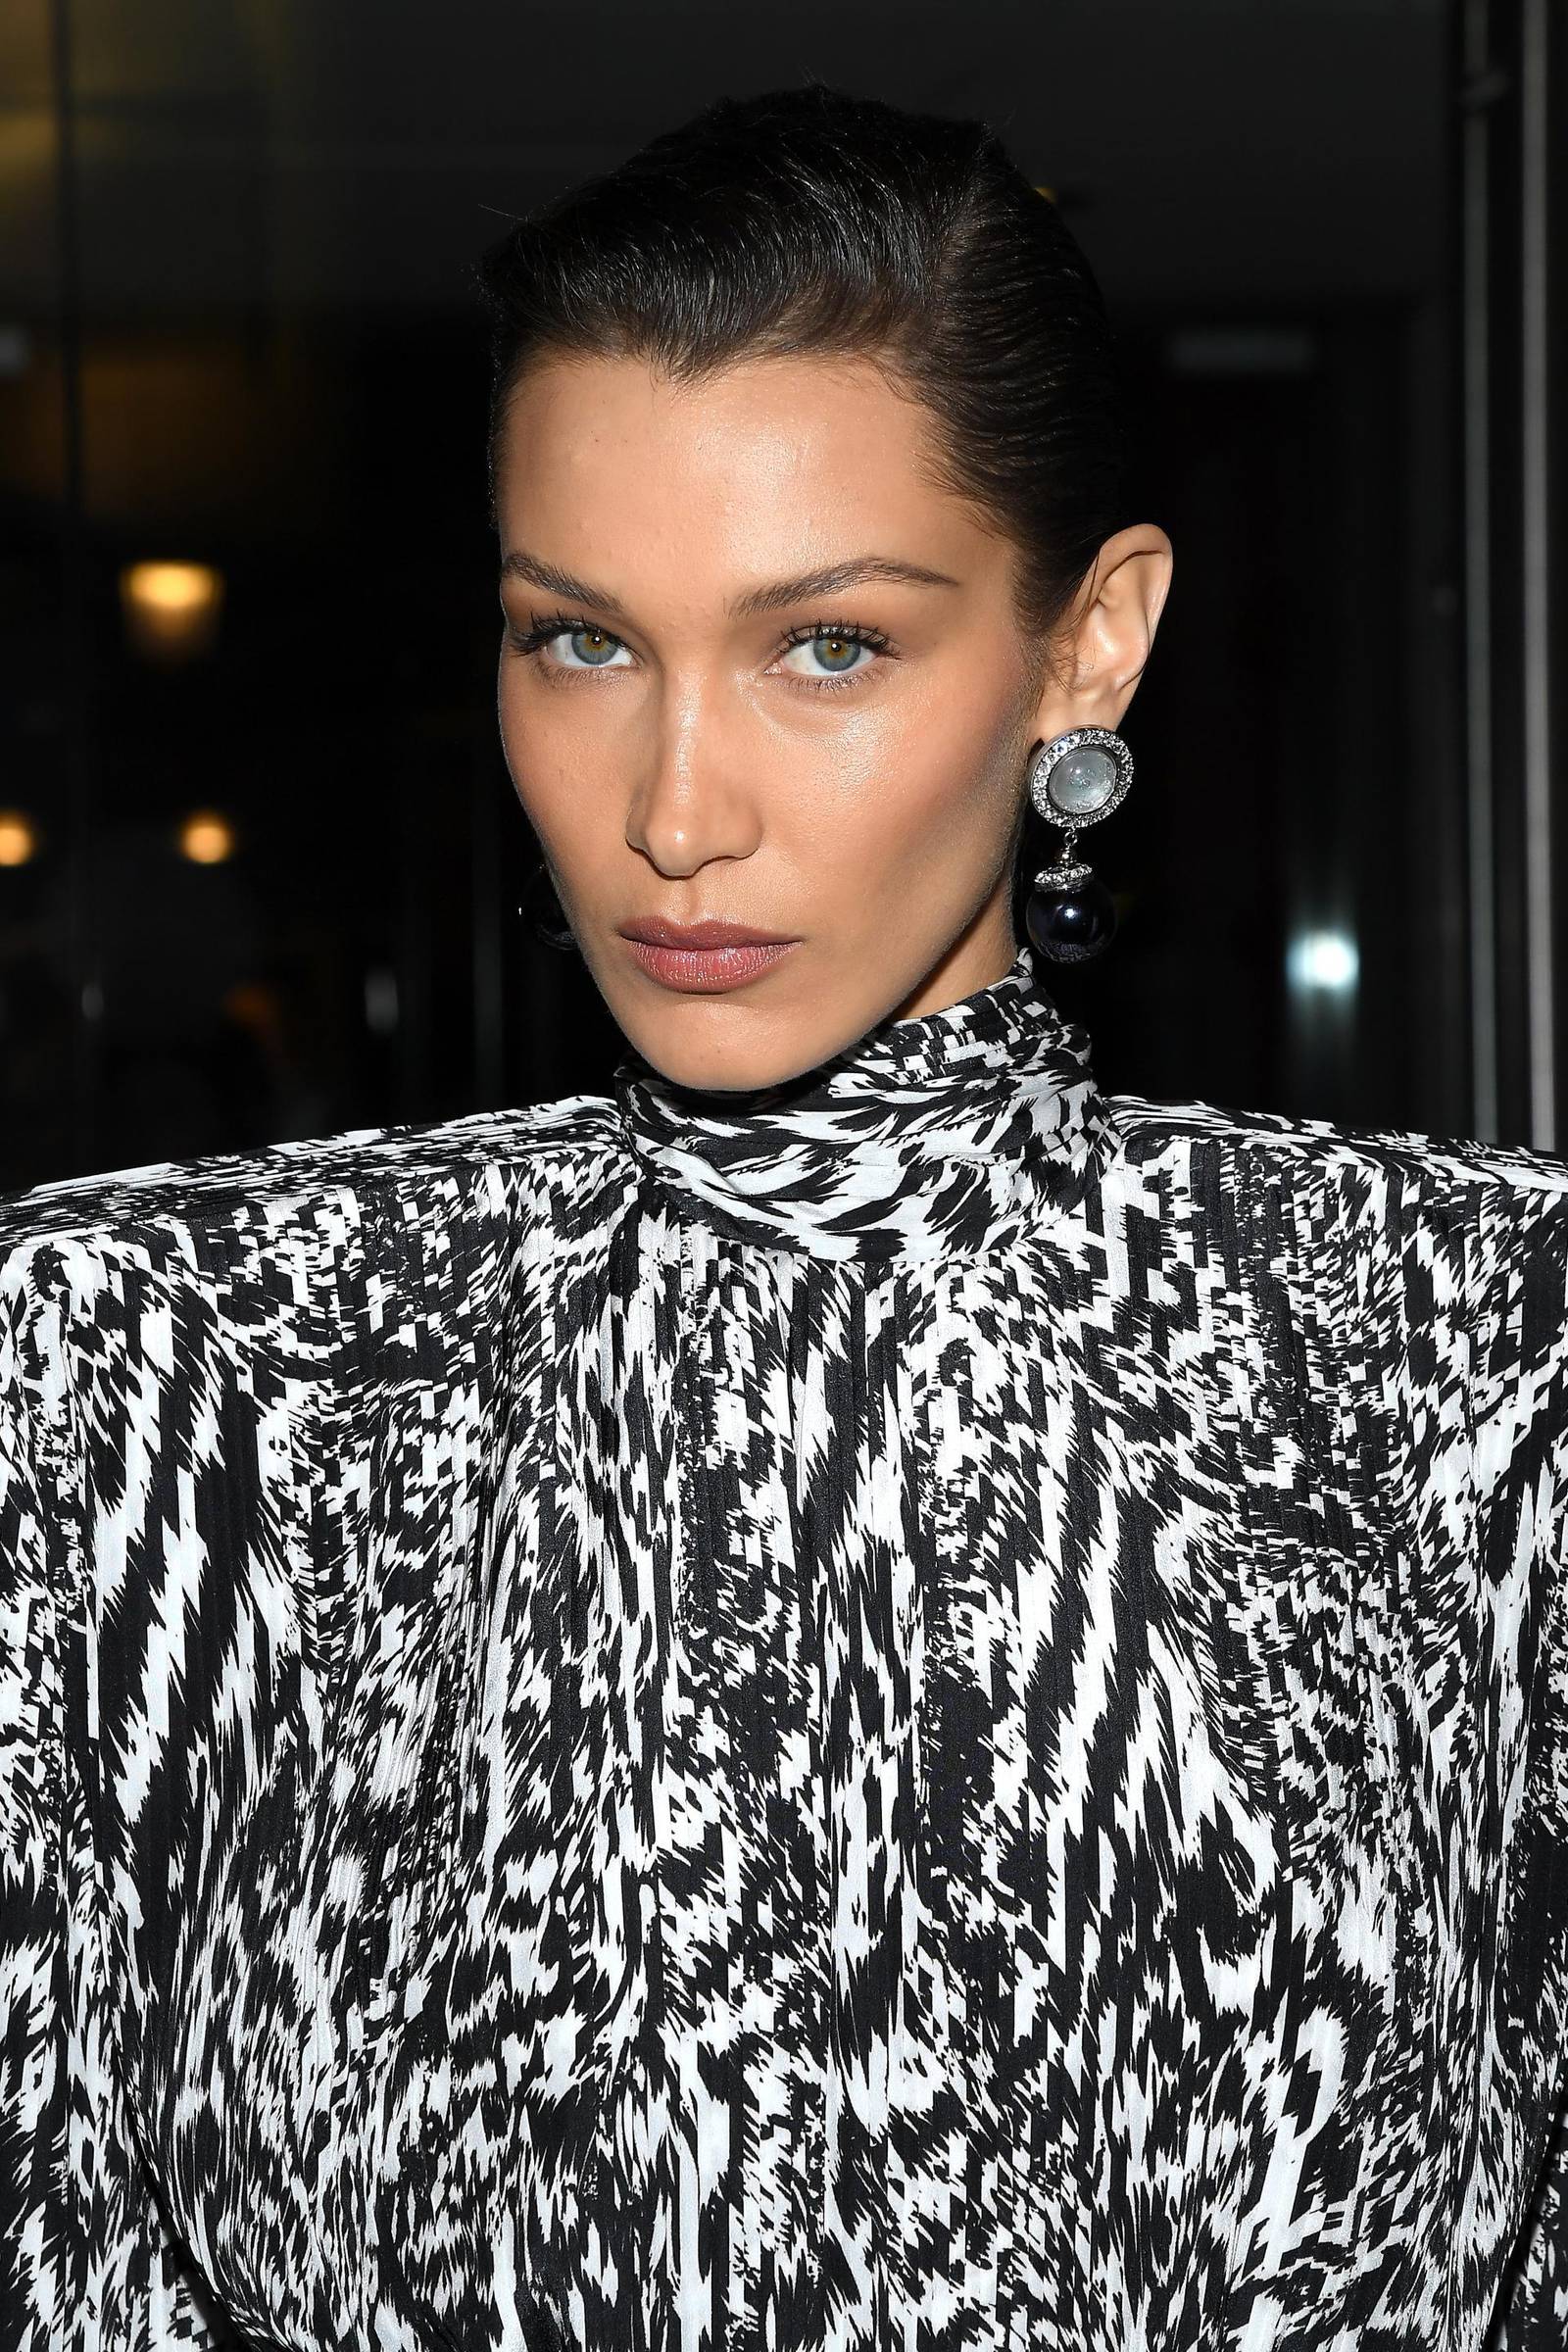 Bella Hadid Opens Up About Lyme Disease Symptoms Every Day I Feel At